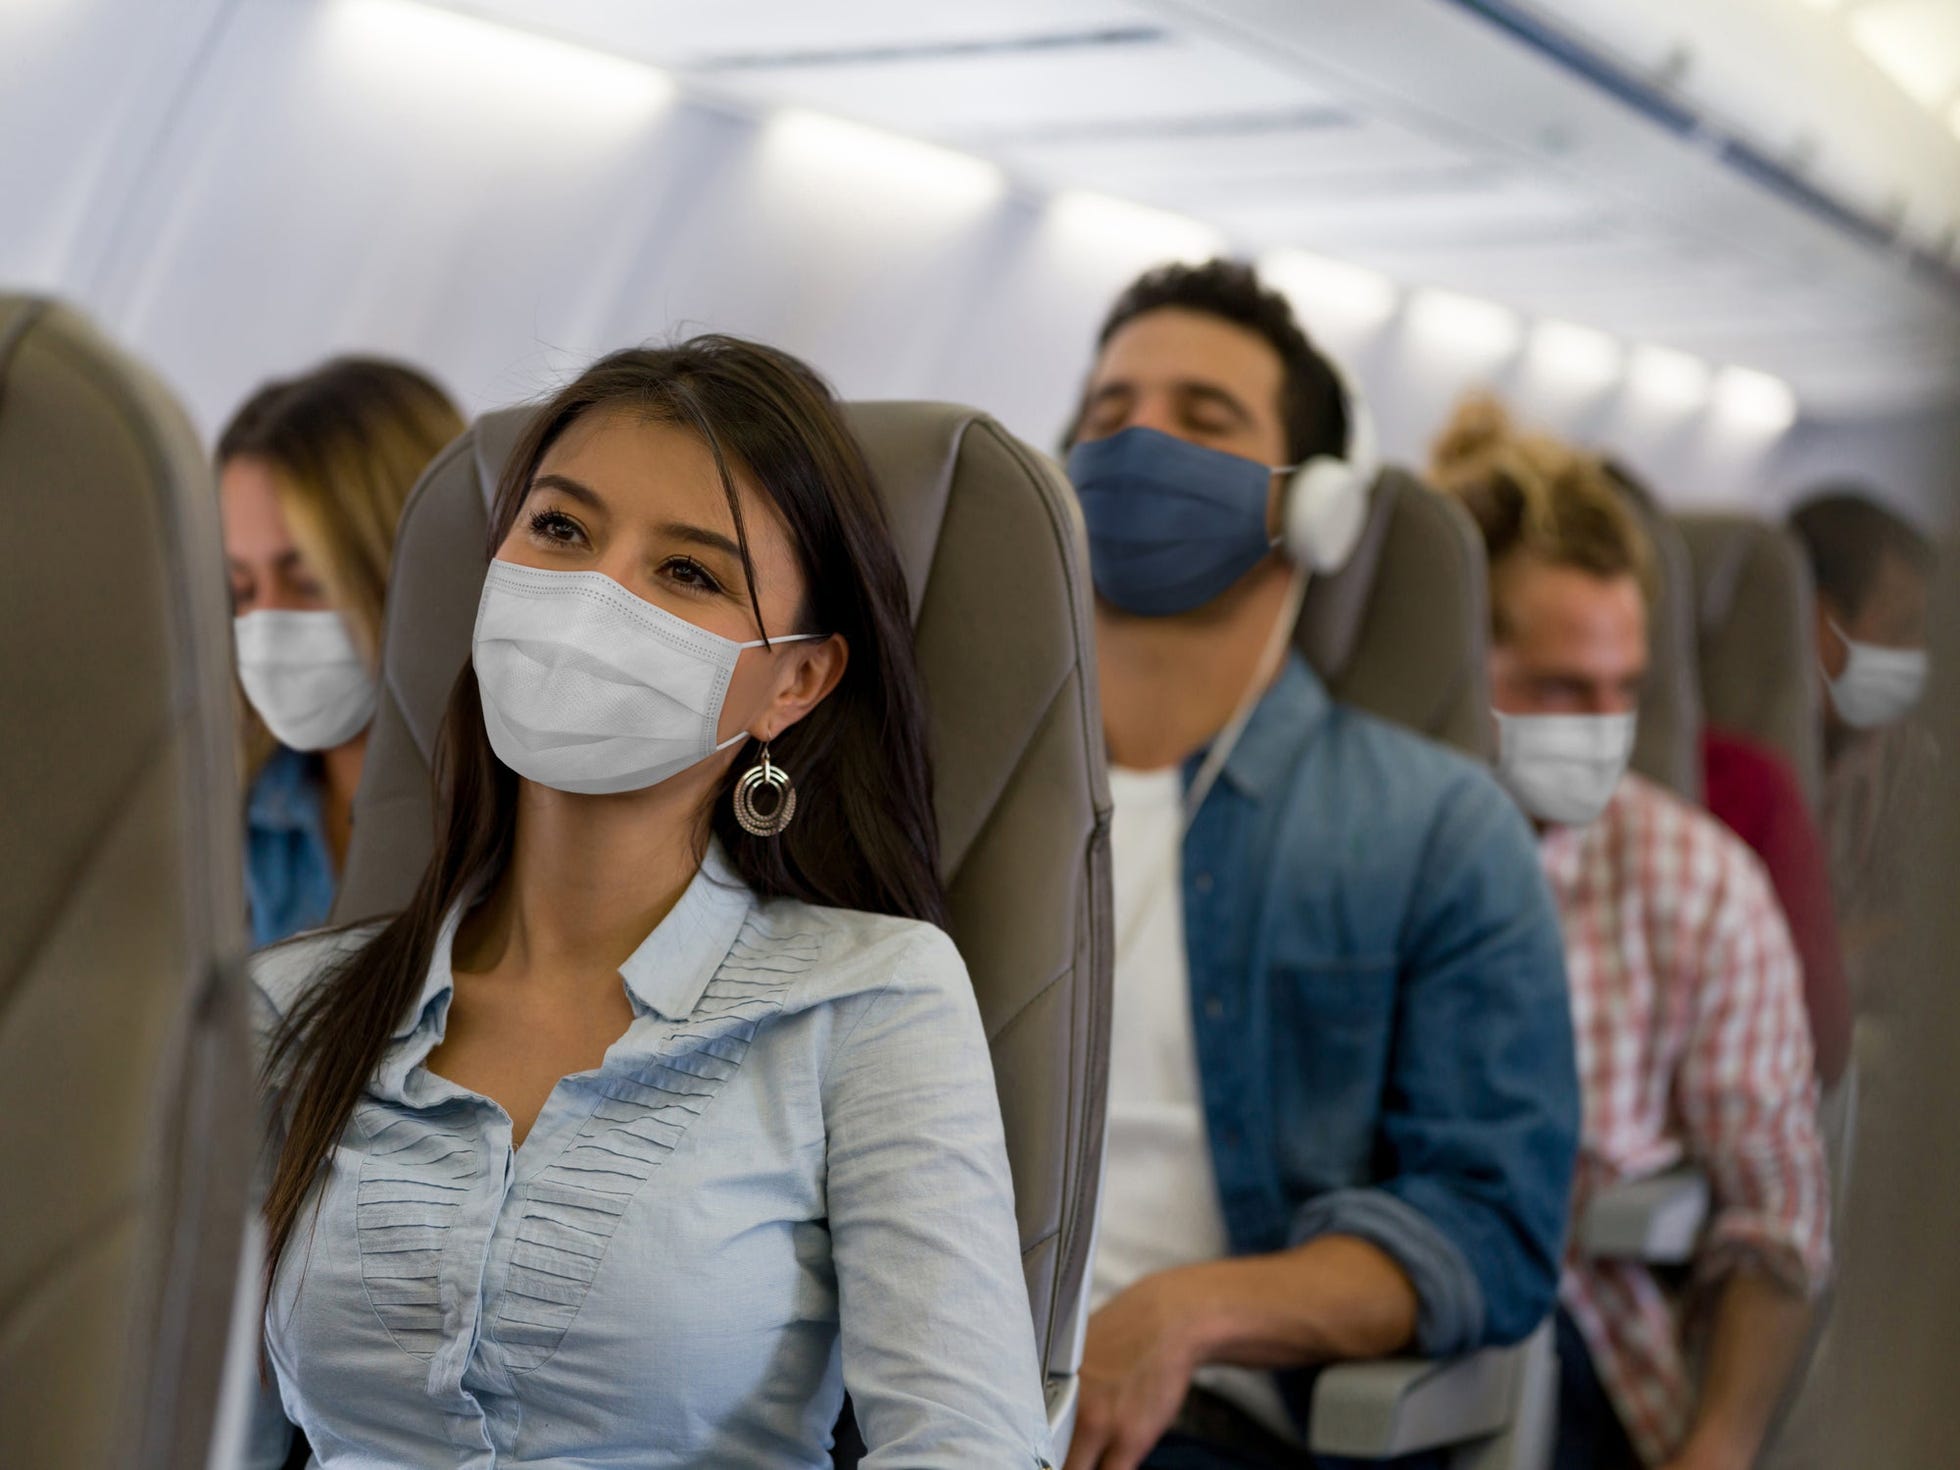 COVID face mask requirements for planes, airports could end this month